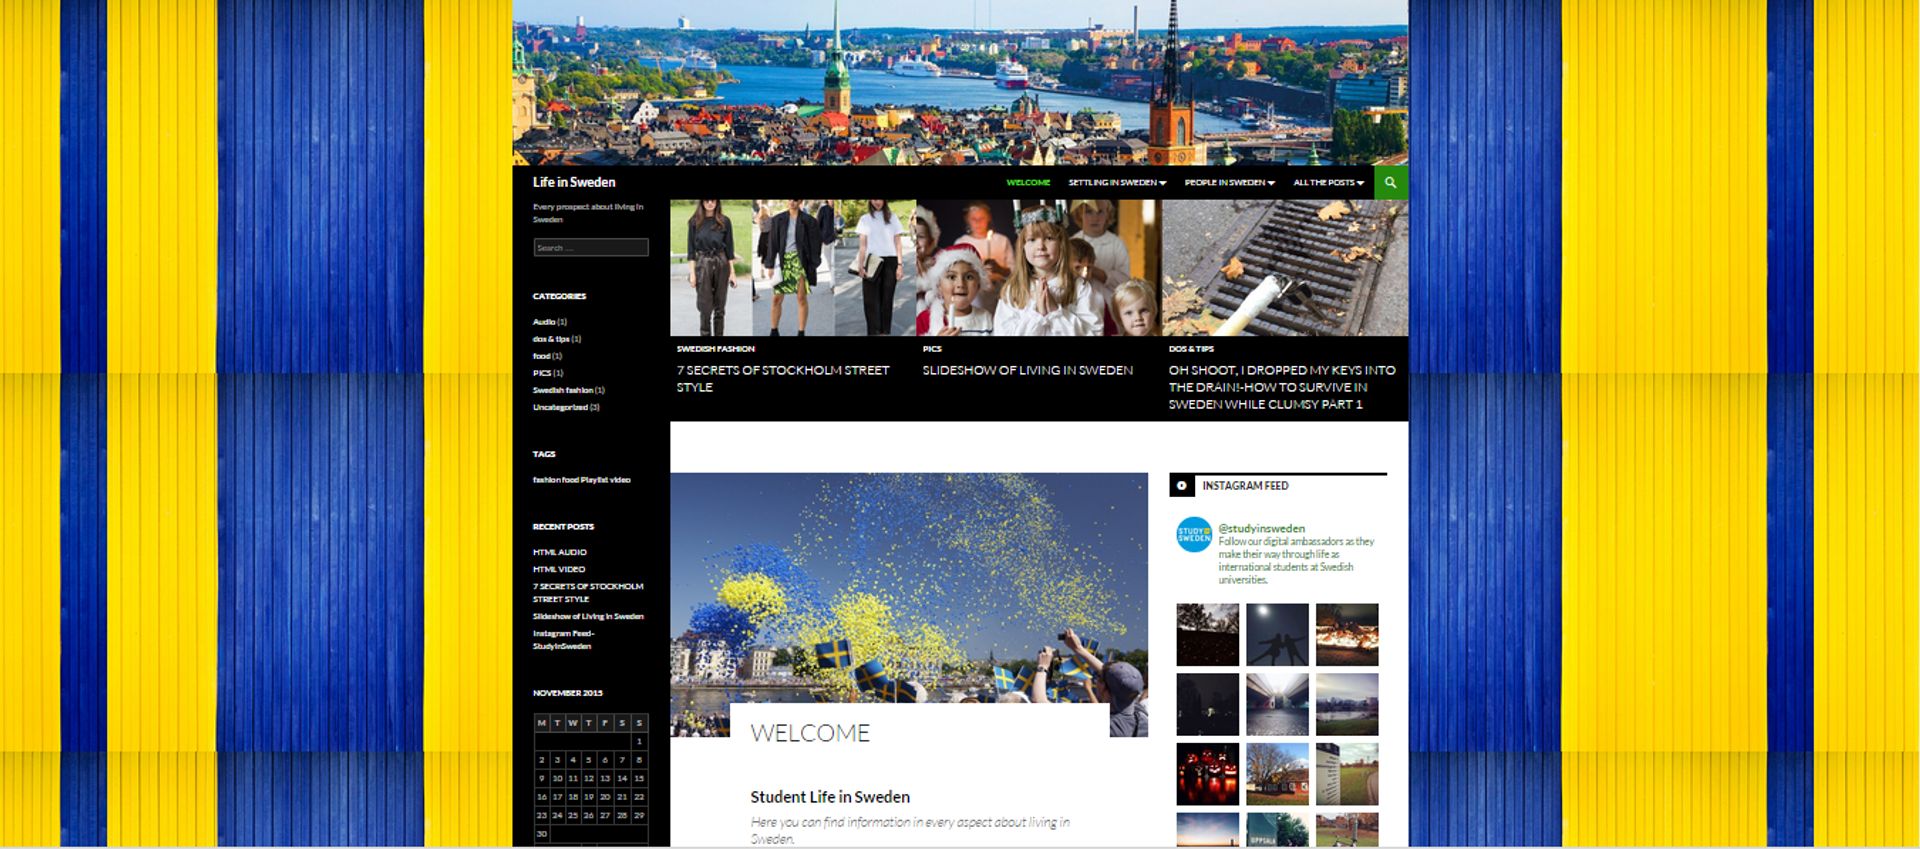 For my personal website, I use the topic of living in Sweden. Very satisfied with my work ;)